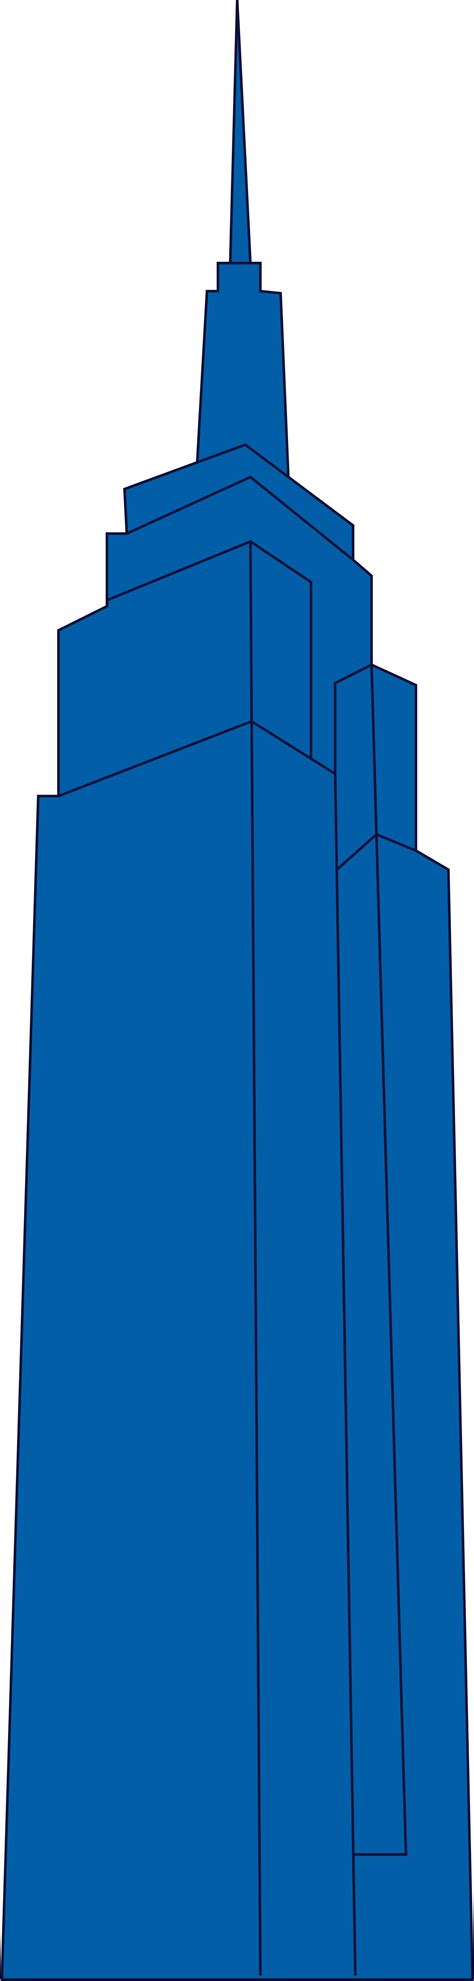 Download Open Empire State Building Svg Clipart 434094 Pinclipart